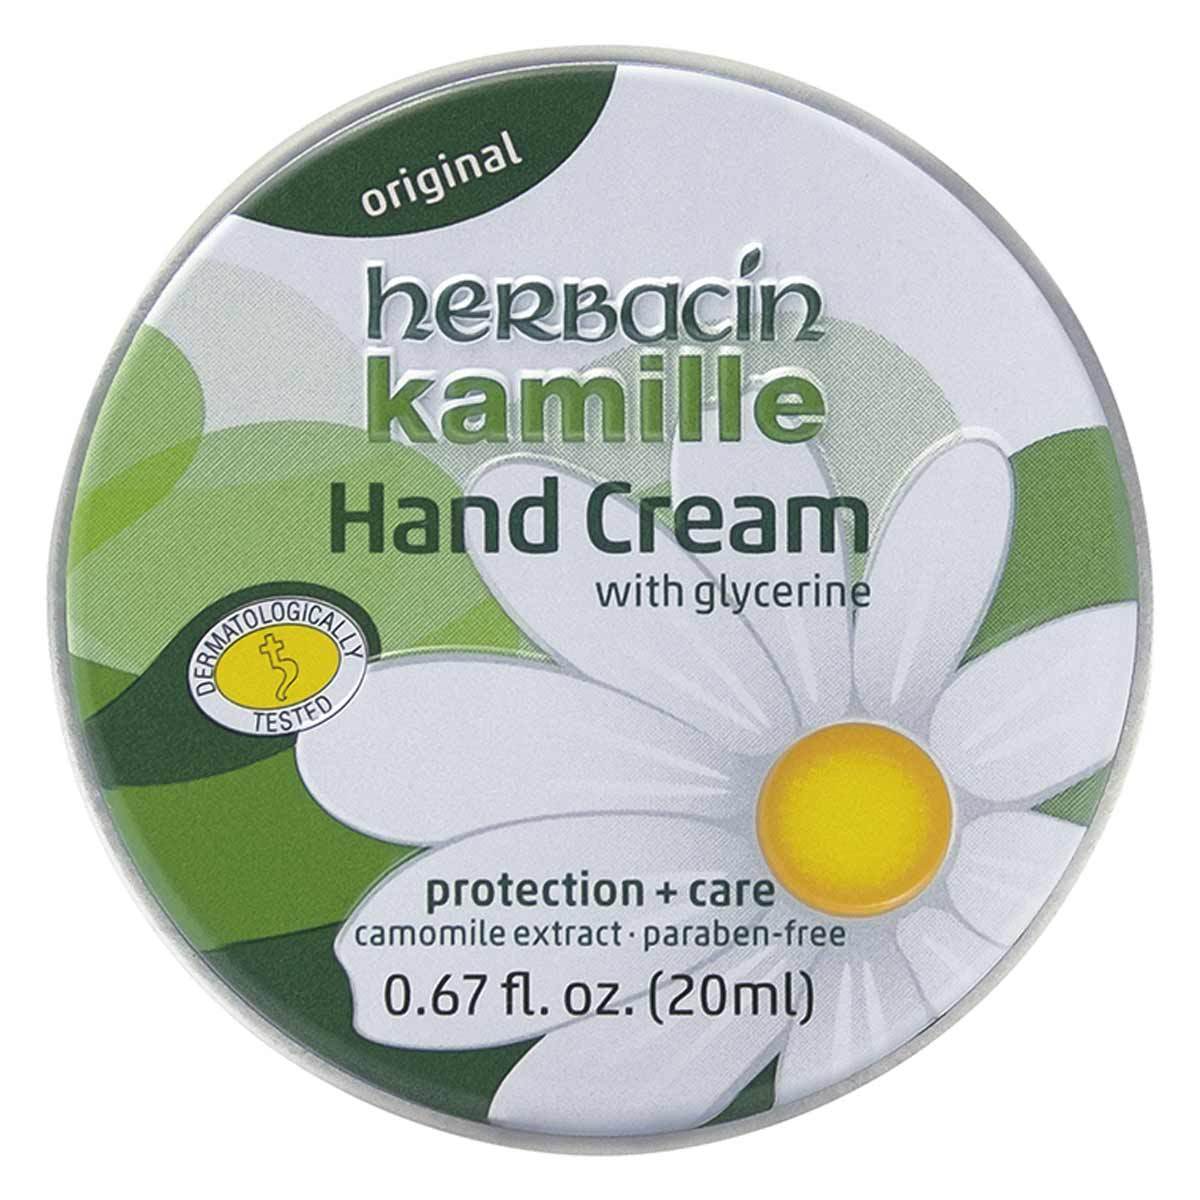 Primary image of Kamille + Glycerin Hand Cream Tin